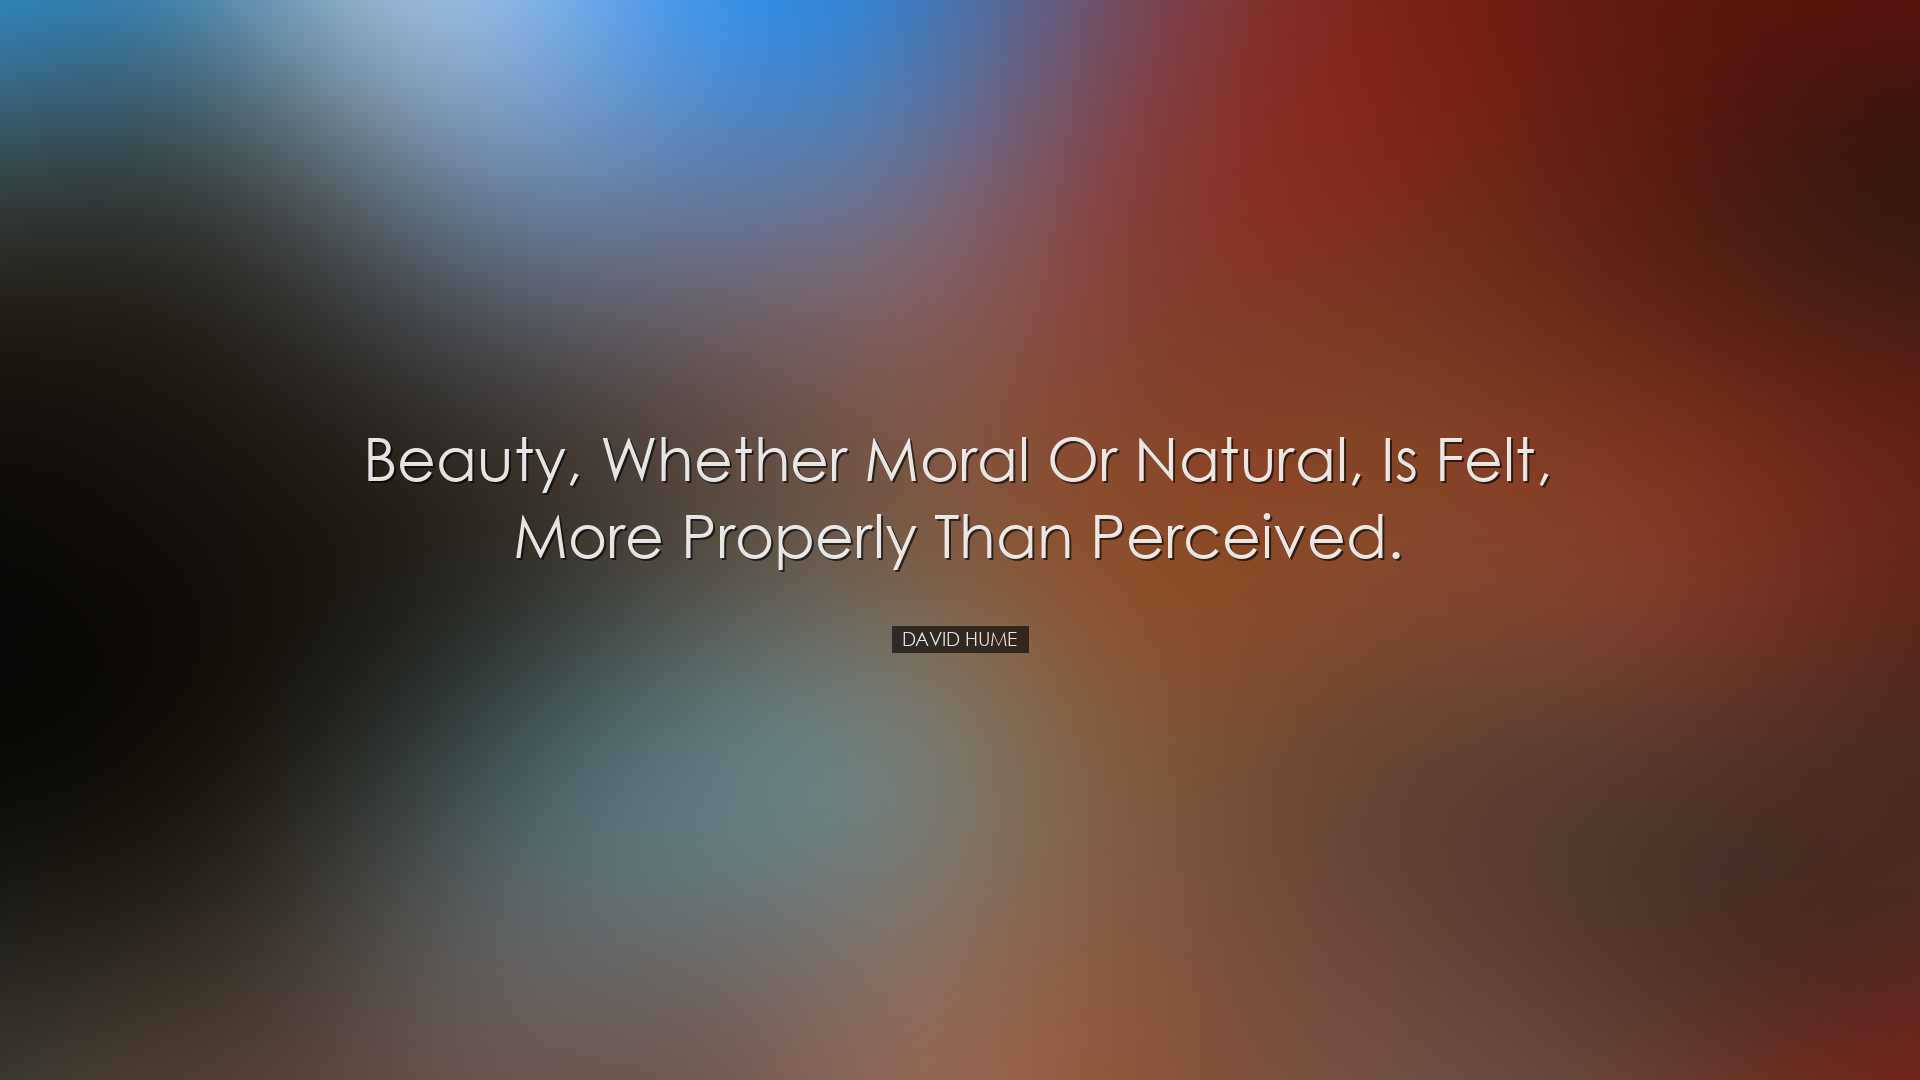 Beauty, whether moral or natural, is felt, more properly than perc